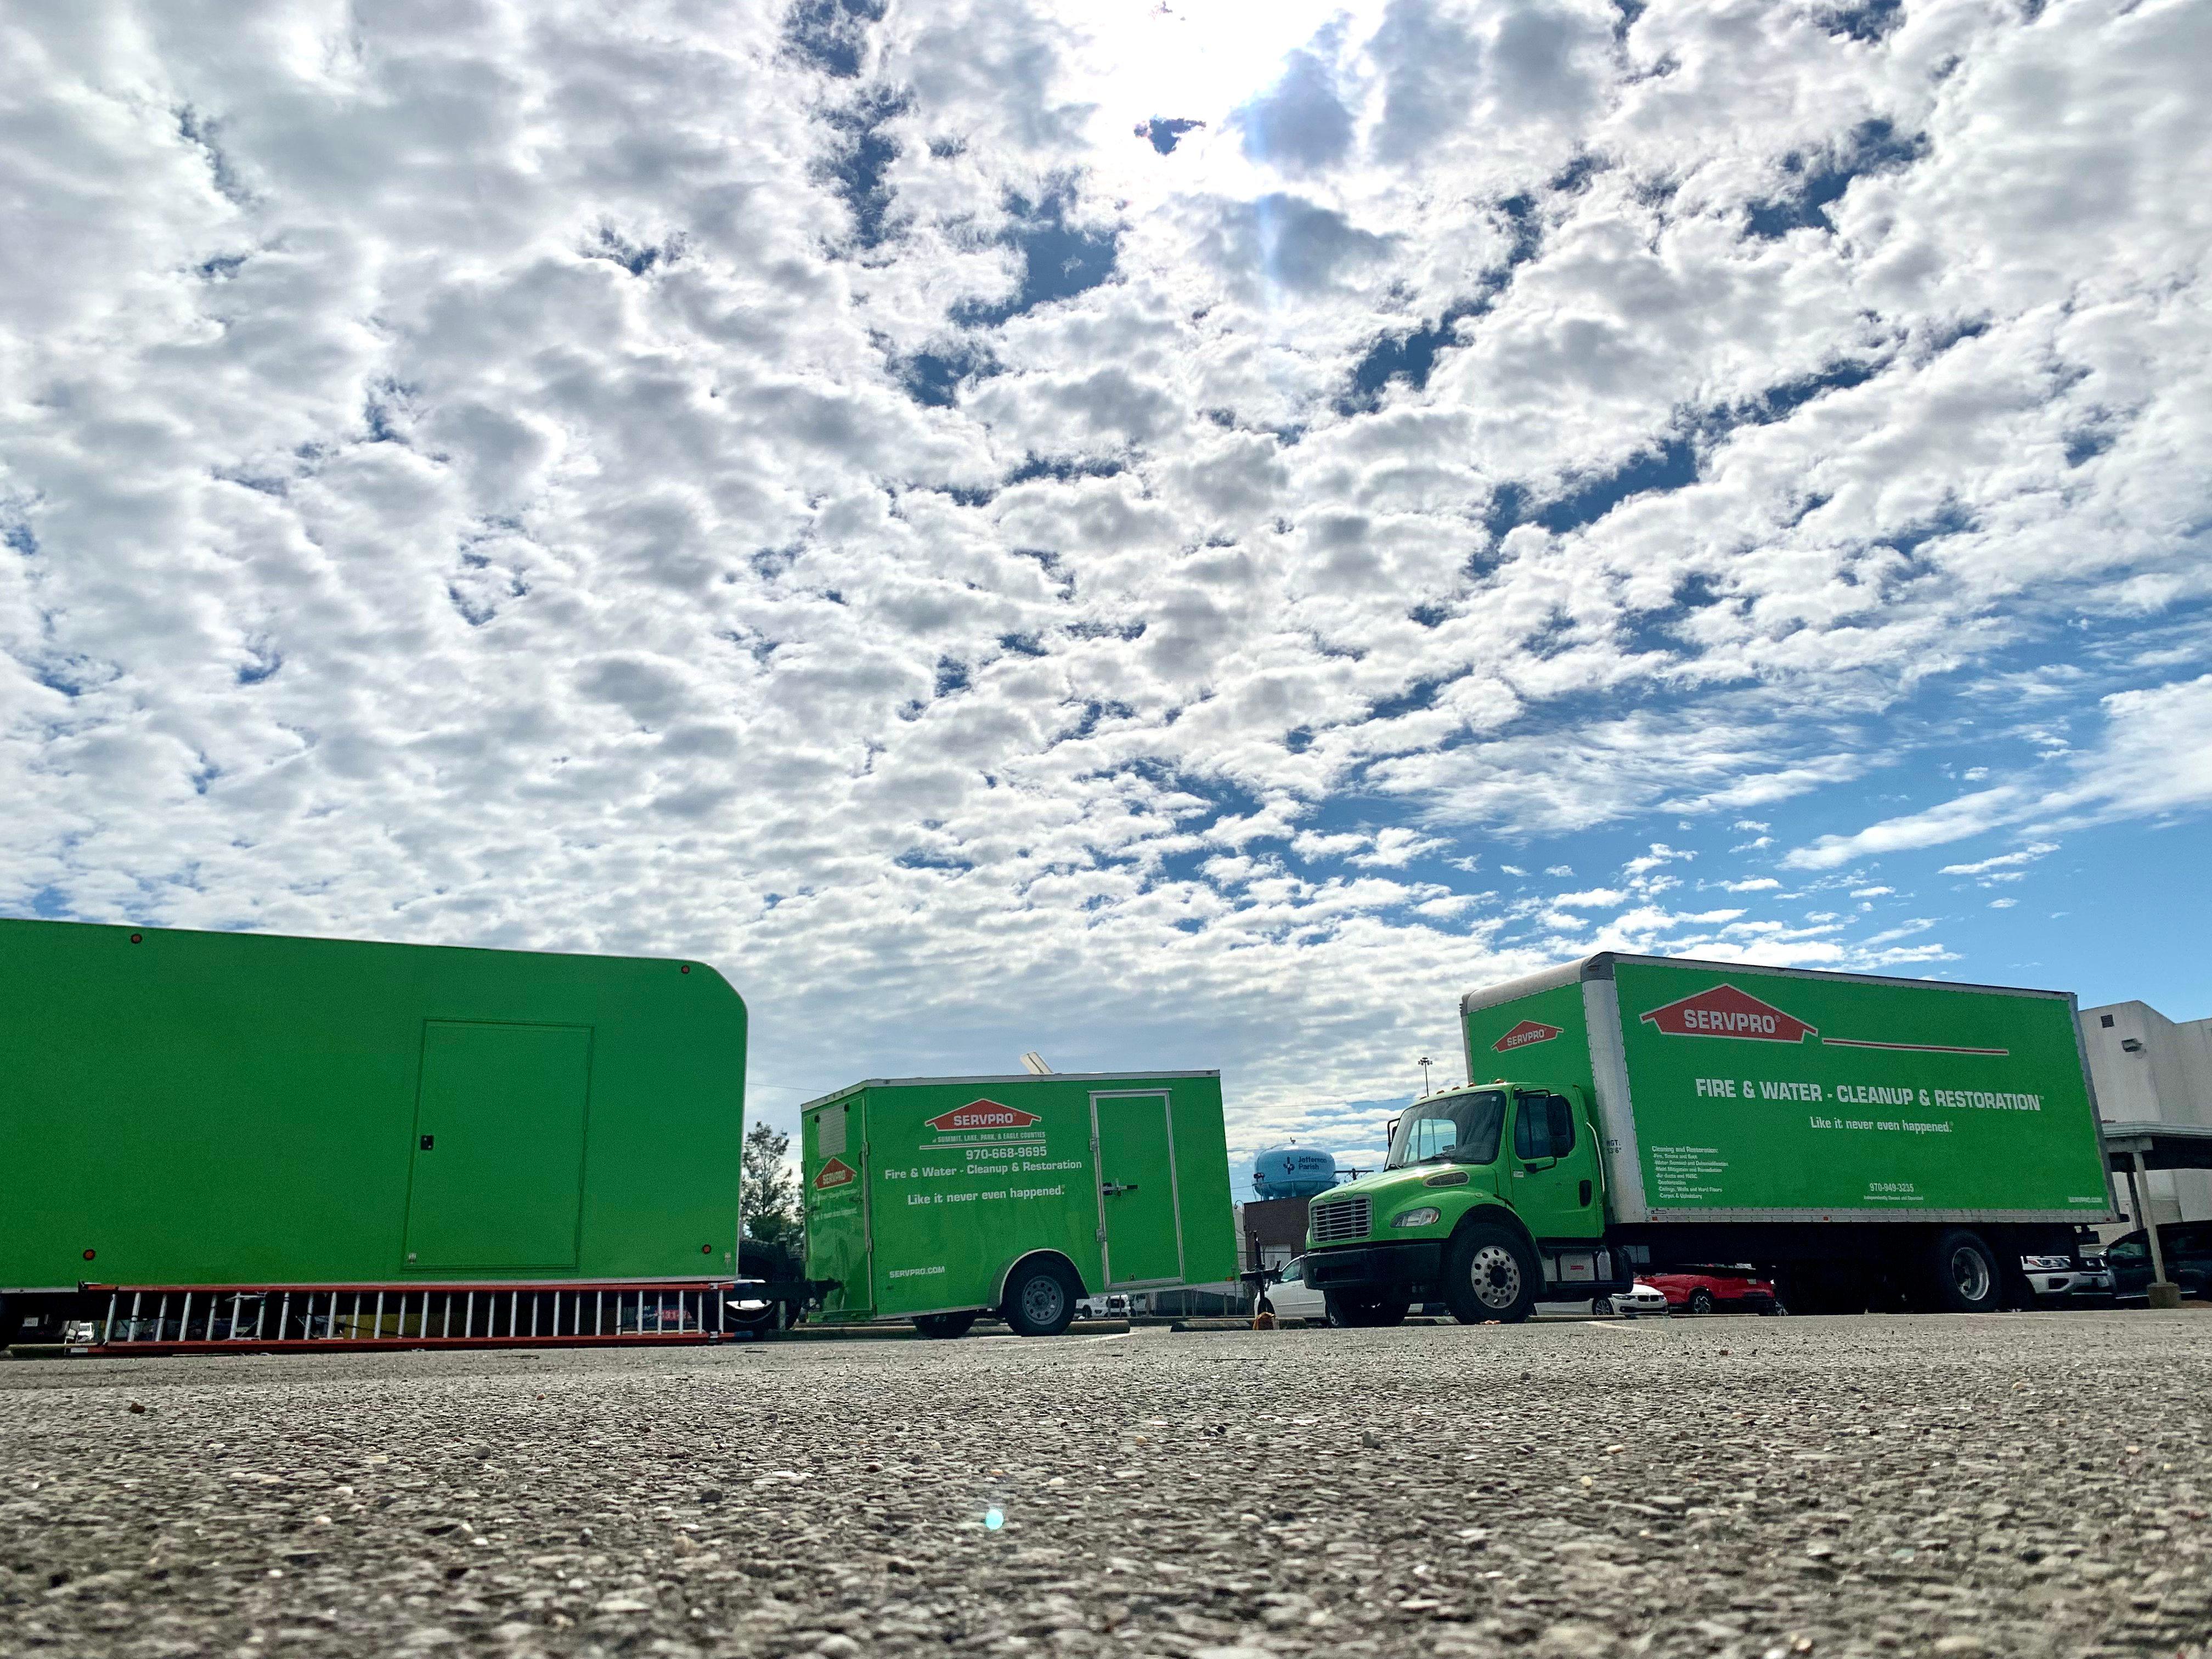 SERVPRO trucks using an adjacent parking lot to park extra vehicles for a large job.